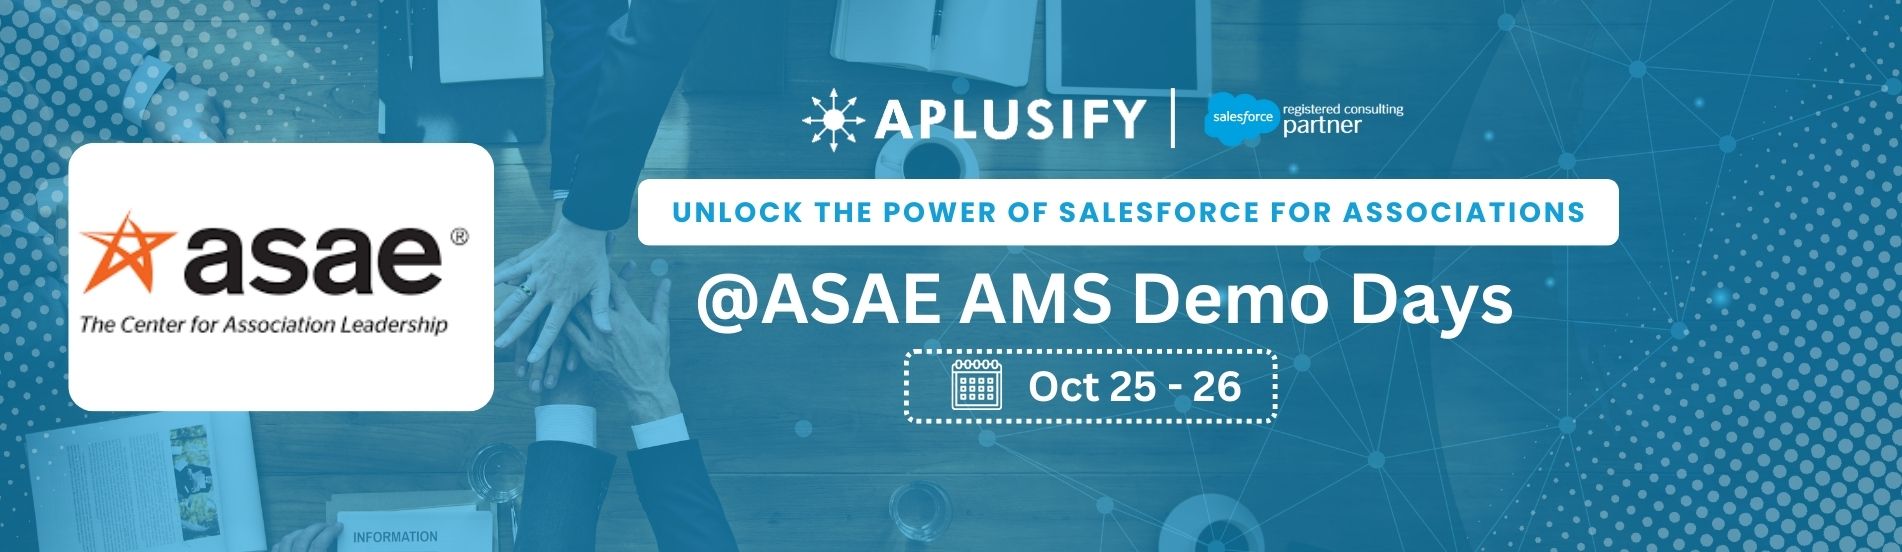 Unlock the Power of Salesforce for Associations